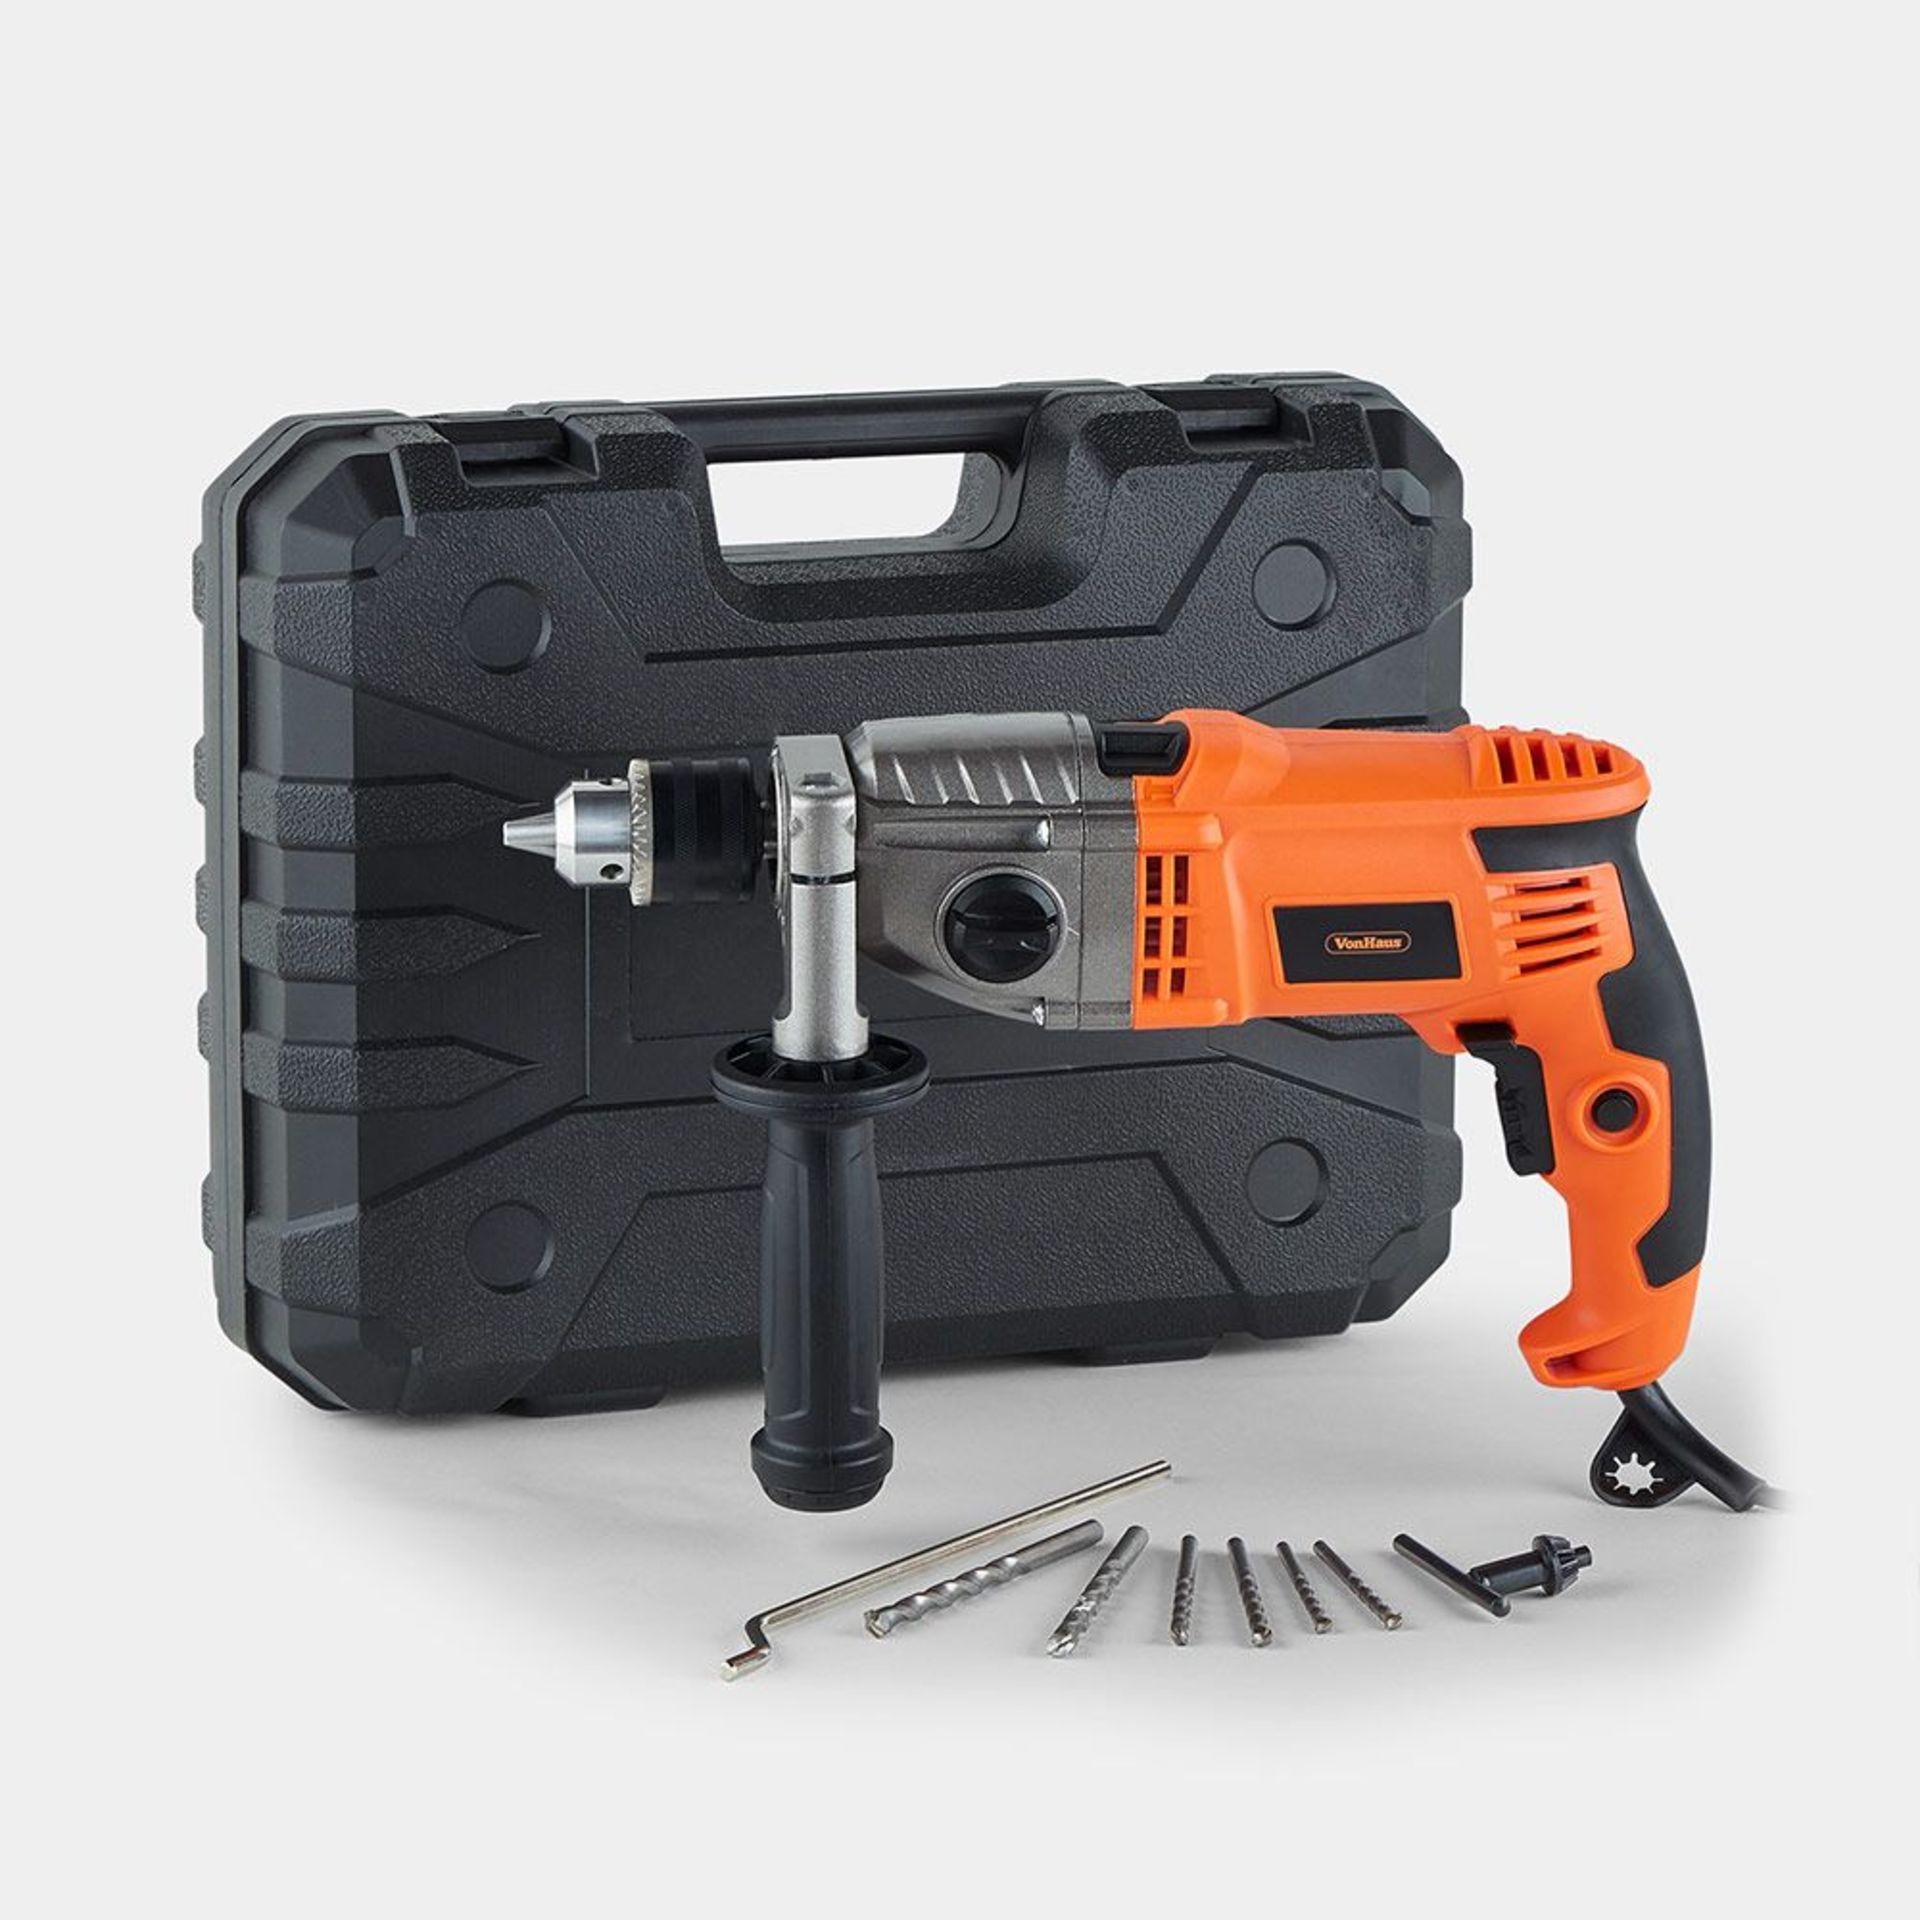 1200w 2 Speed Impact Drill. - BI. The dual drill or hammer function, high quality 13mm keyed chuck